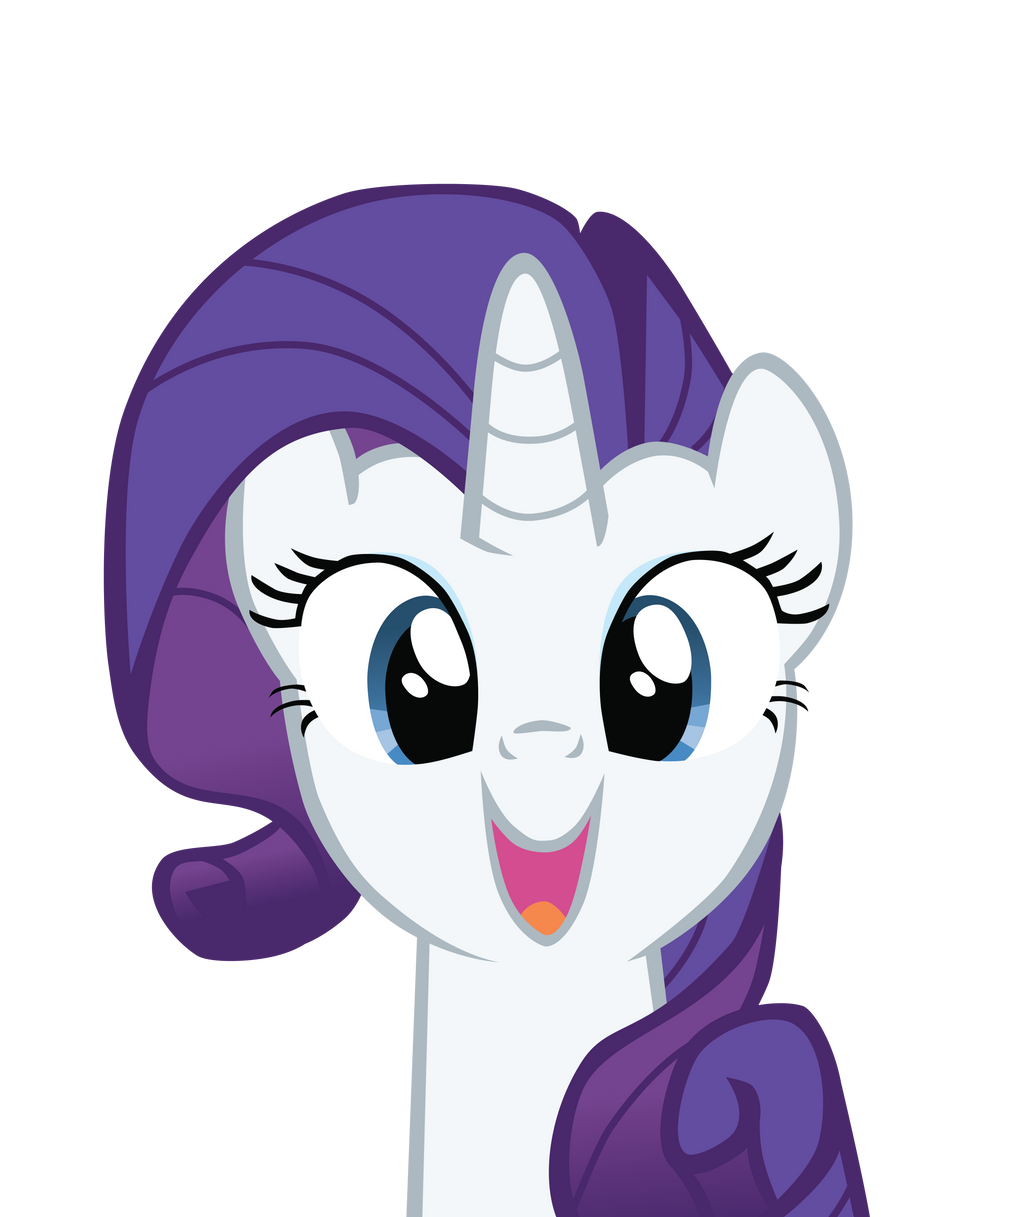 rarity_is_happy_to_see_you_by_bio_999-d5